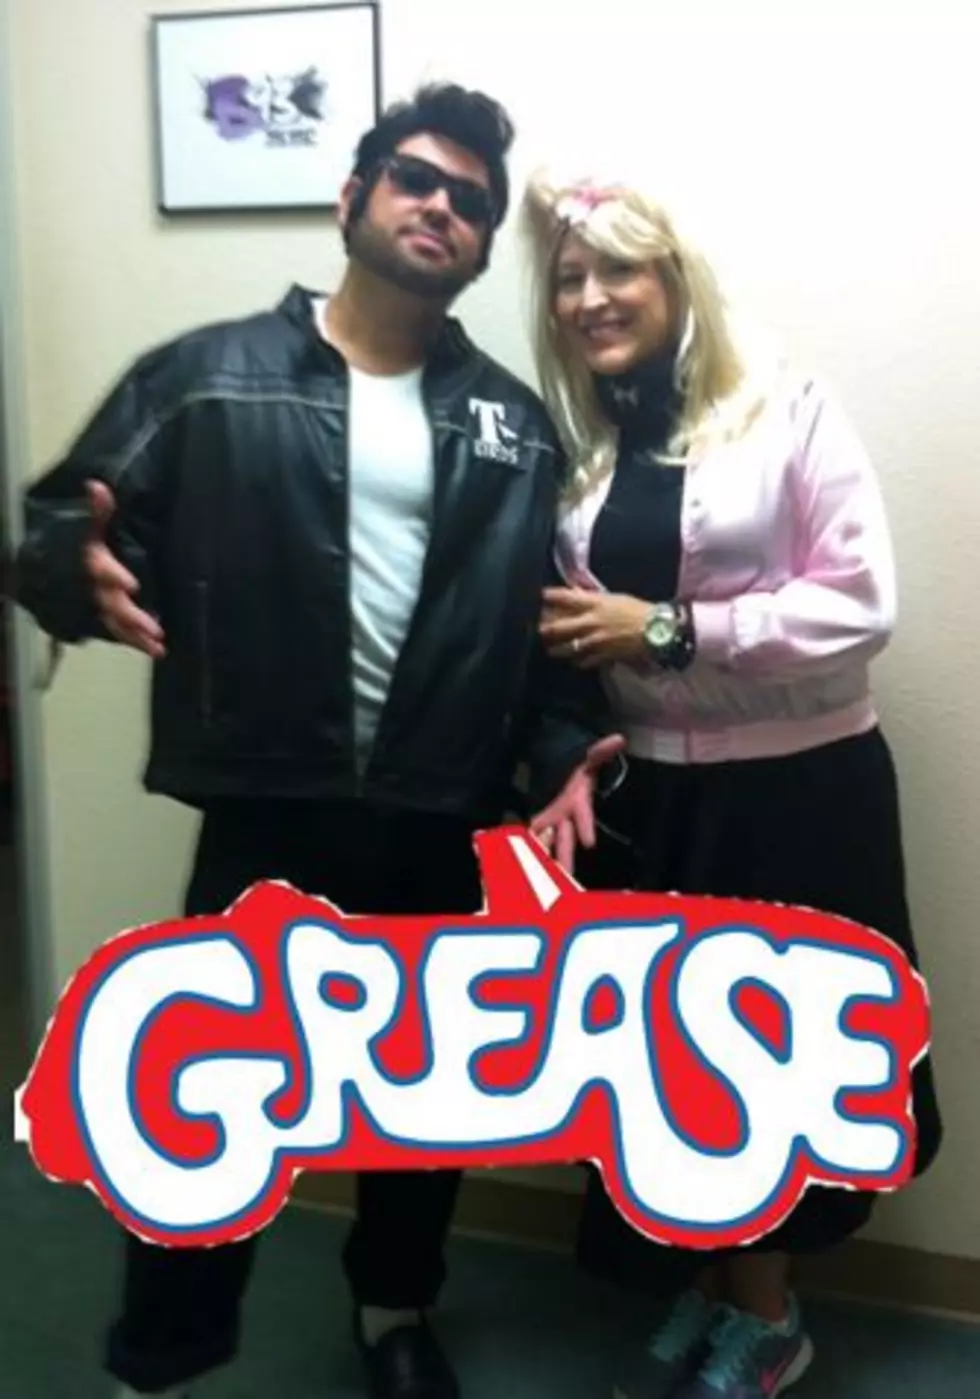 Why You Should Dress Up For Our GREASE Party!